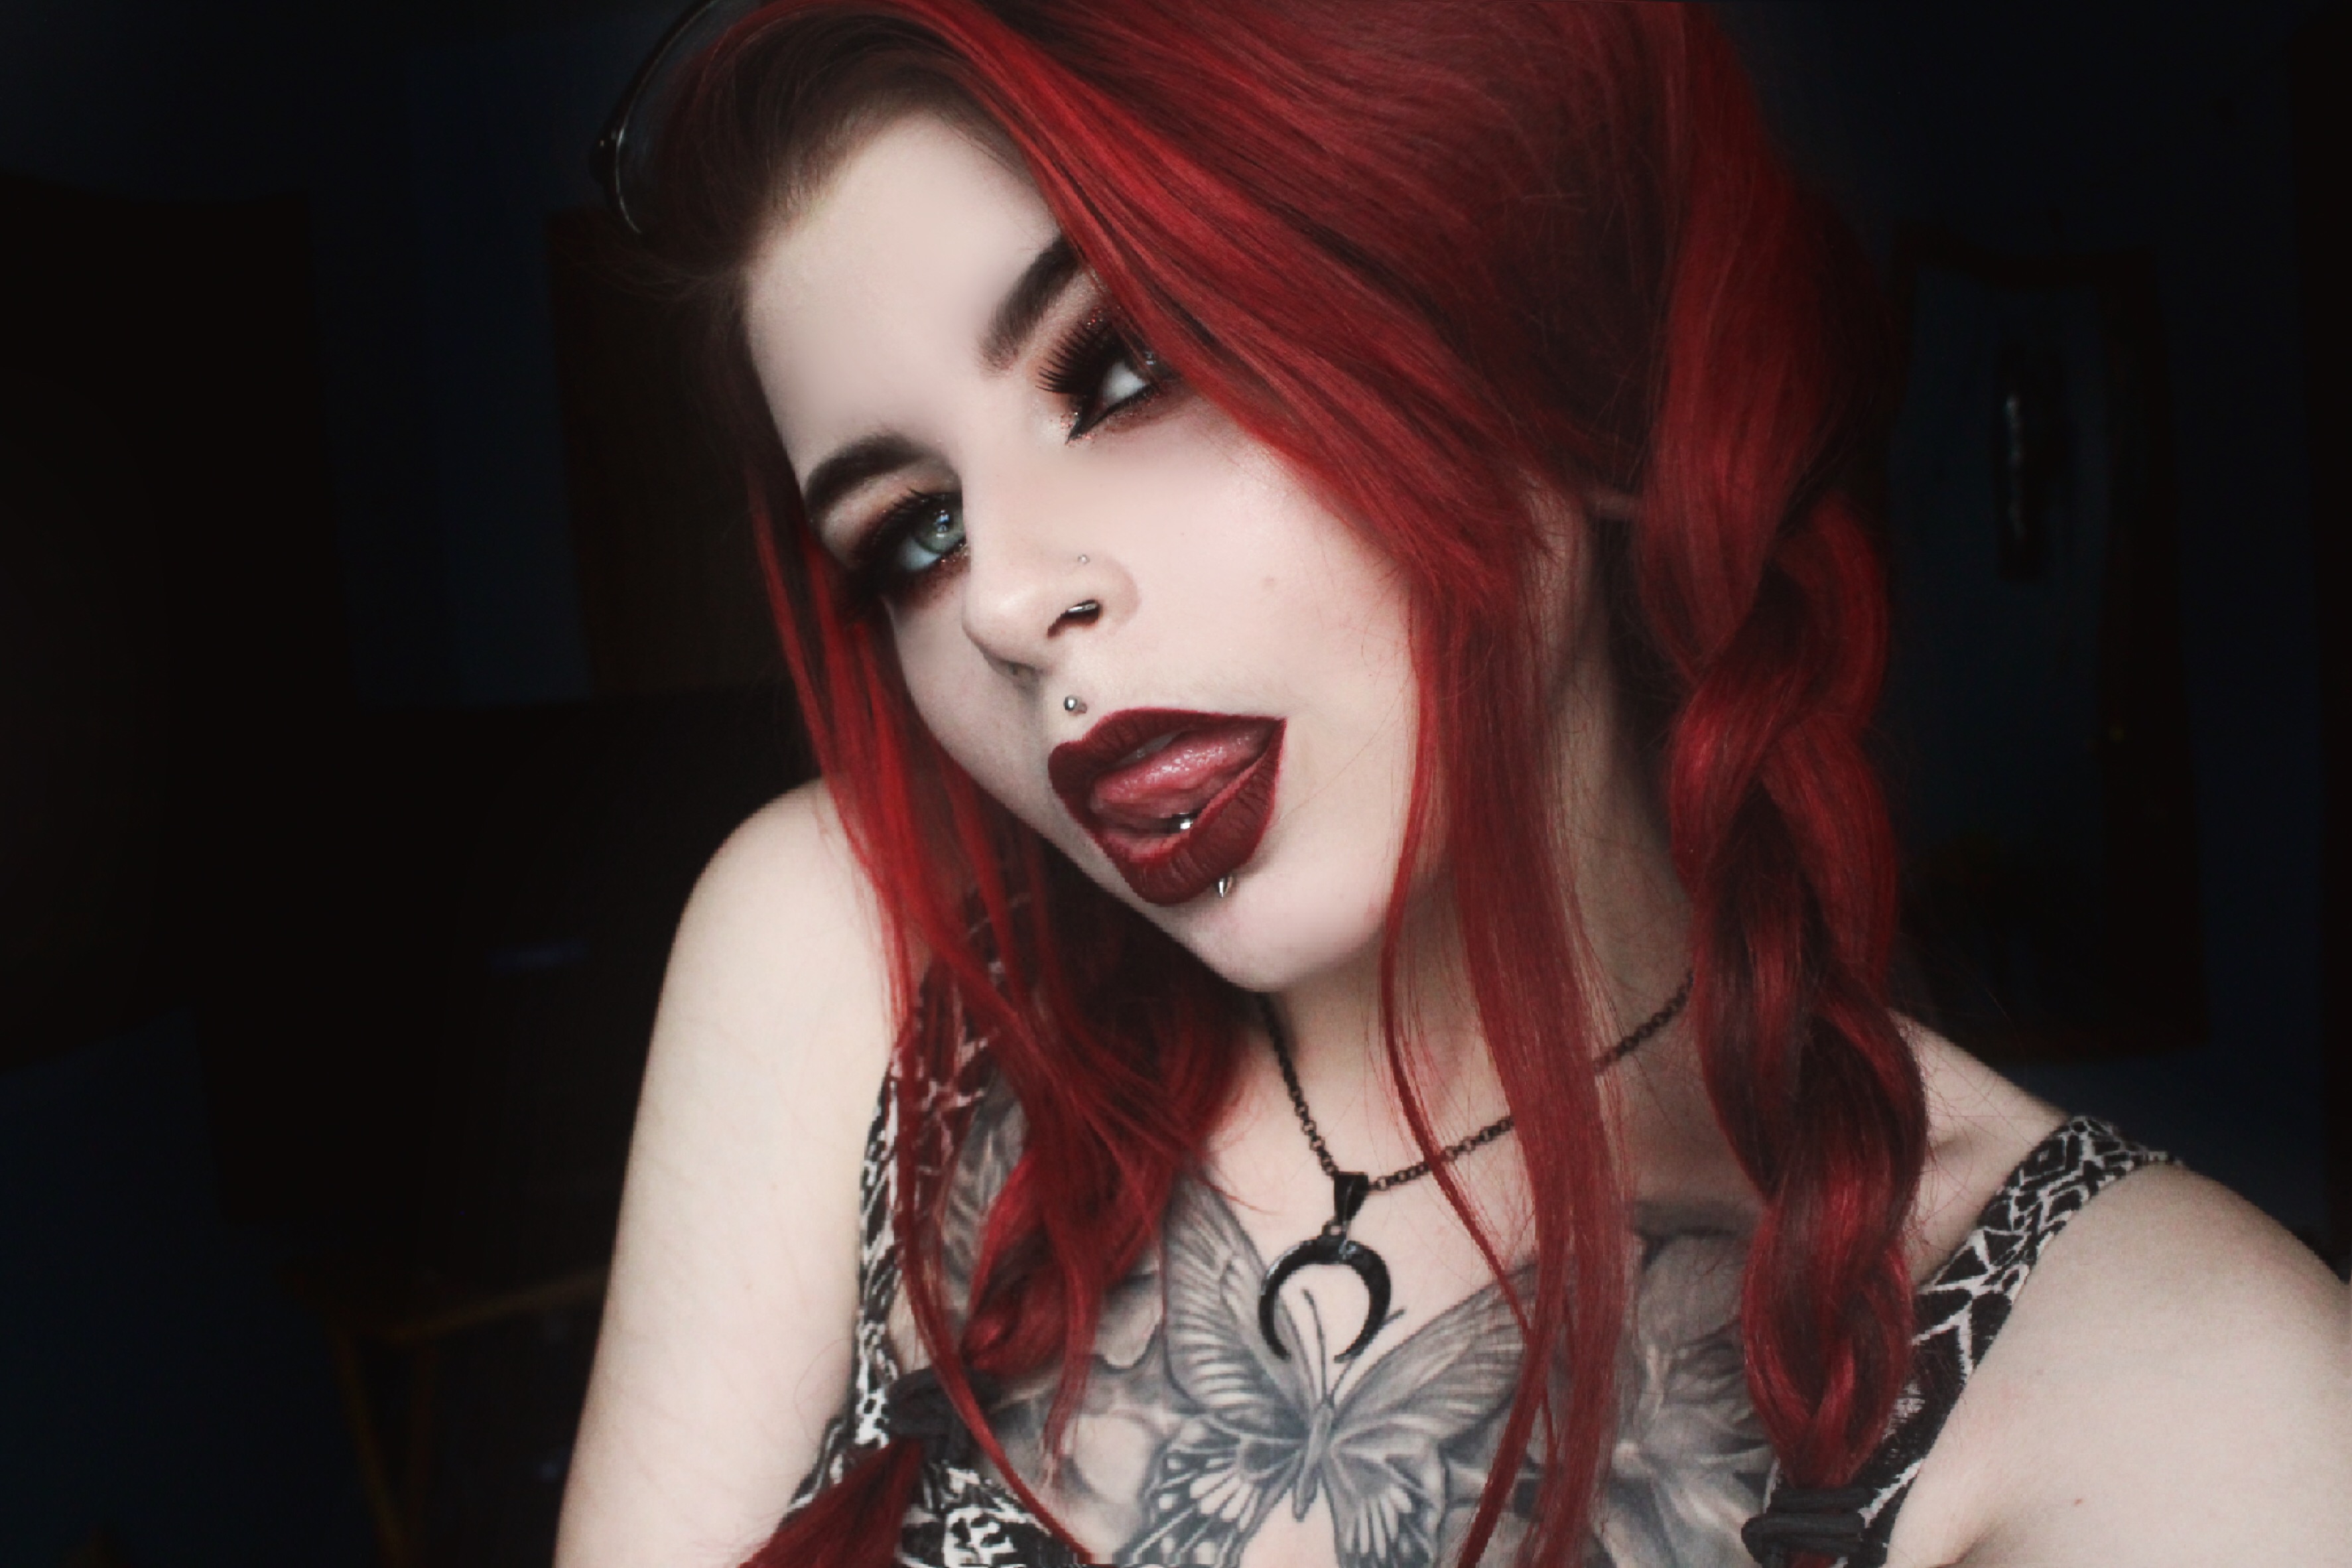 Streaming Onlyfans Redhead Goth Gothic Corsets Victoriandress Photography Abandonedbuilding